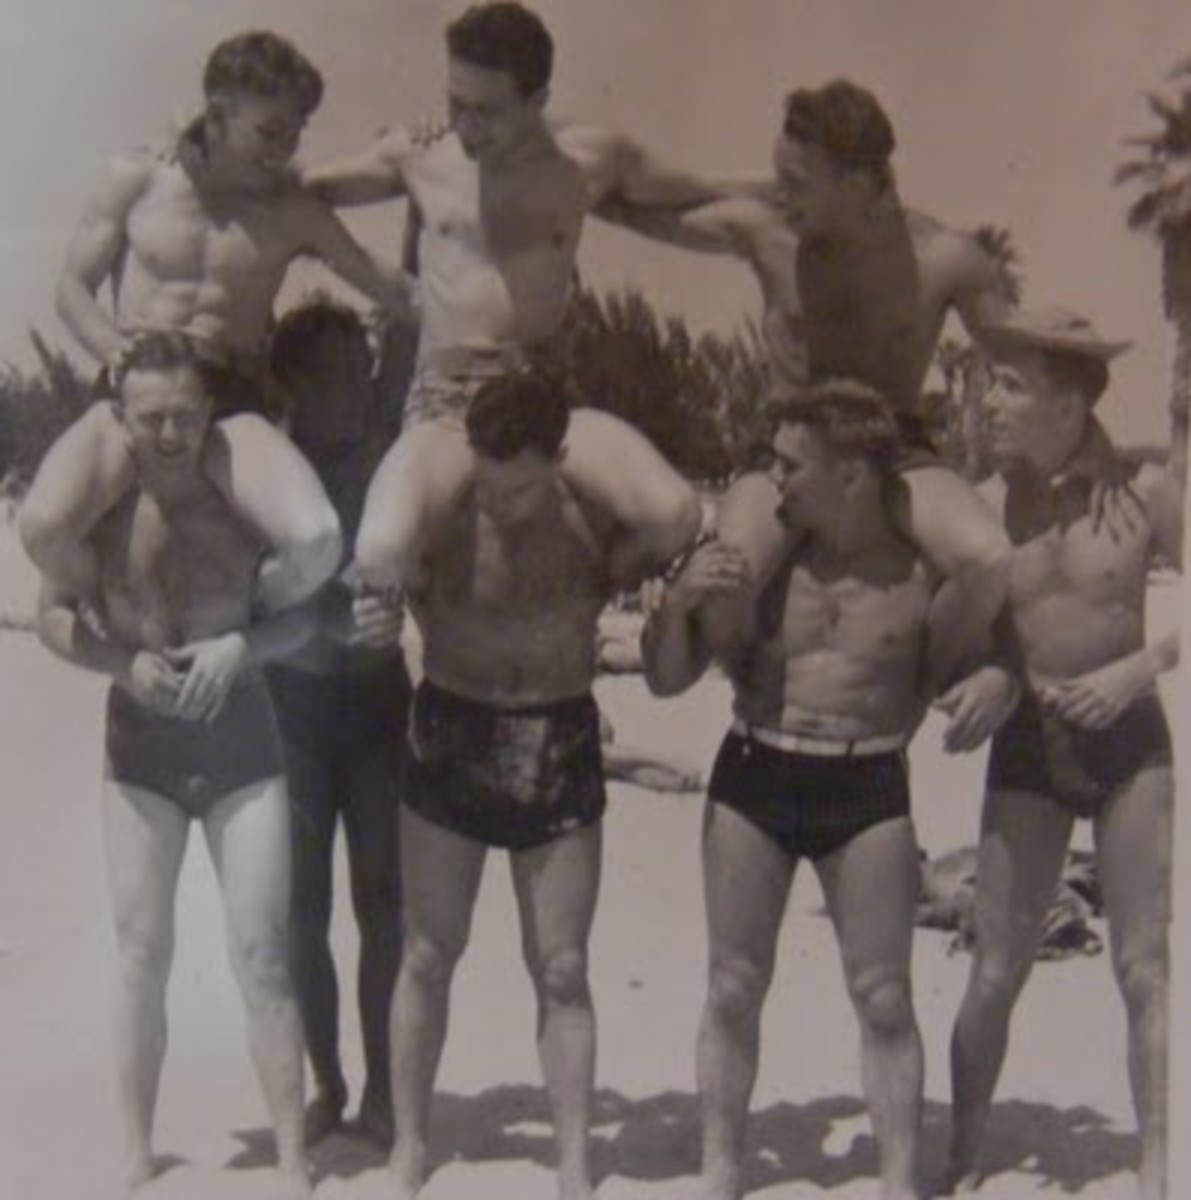 Back in those days, those surfer shorts did not exist; men could wear Speedos without having their sexuality thrown into question